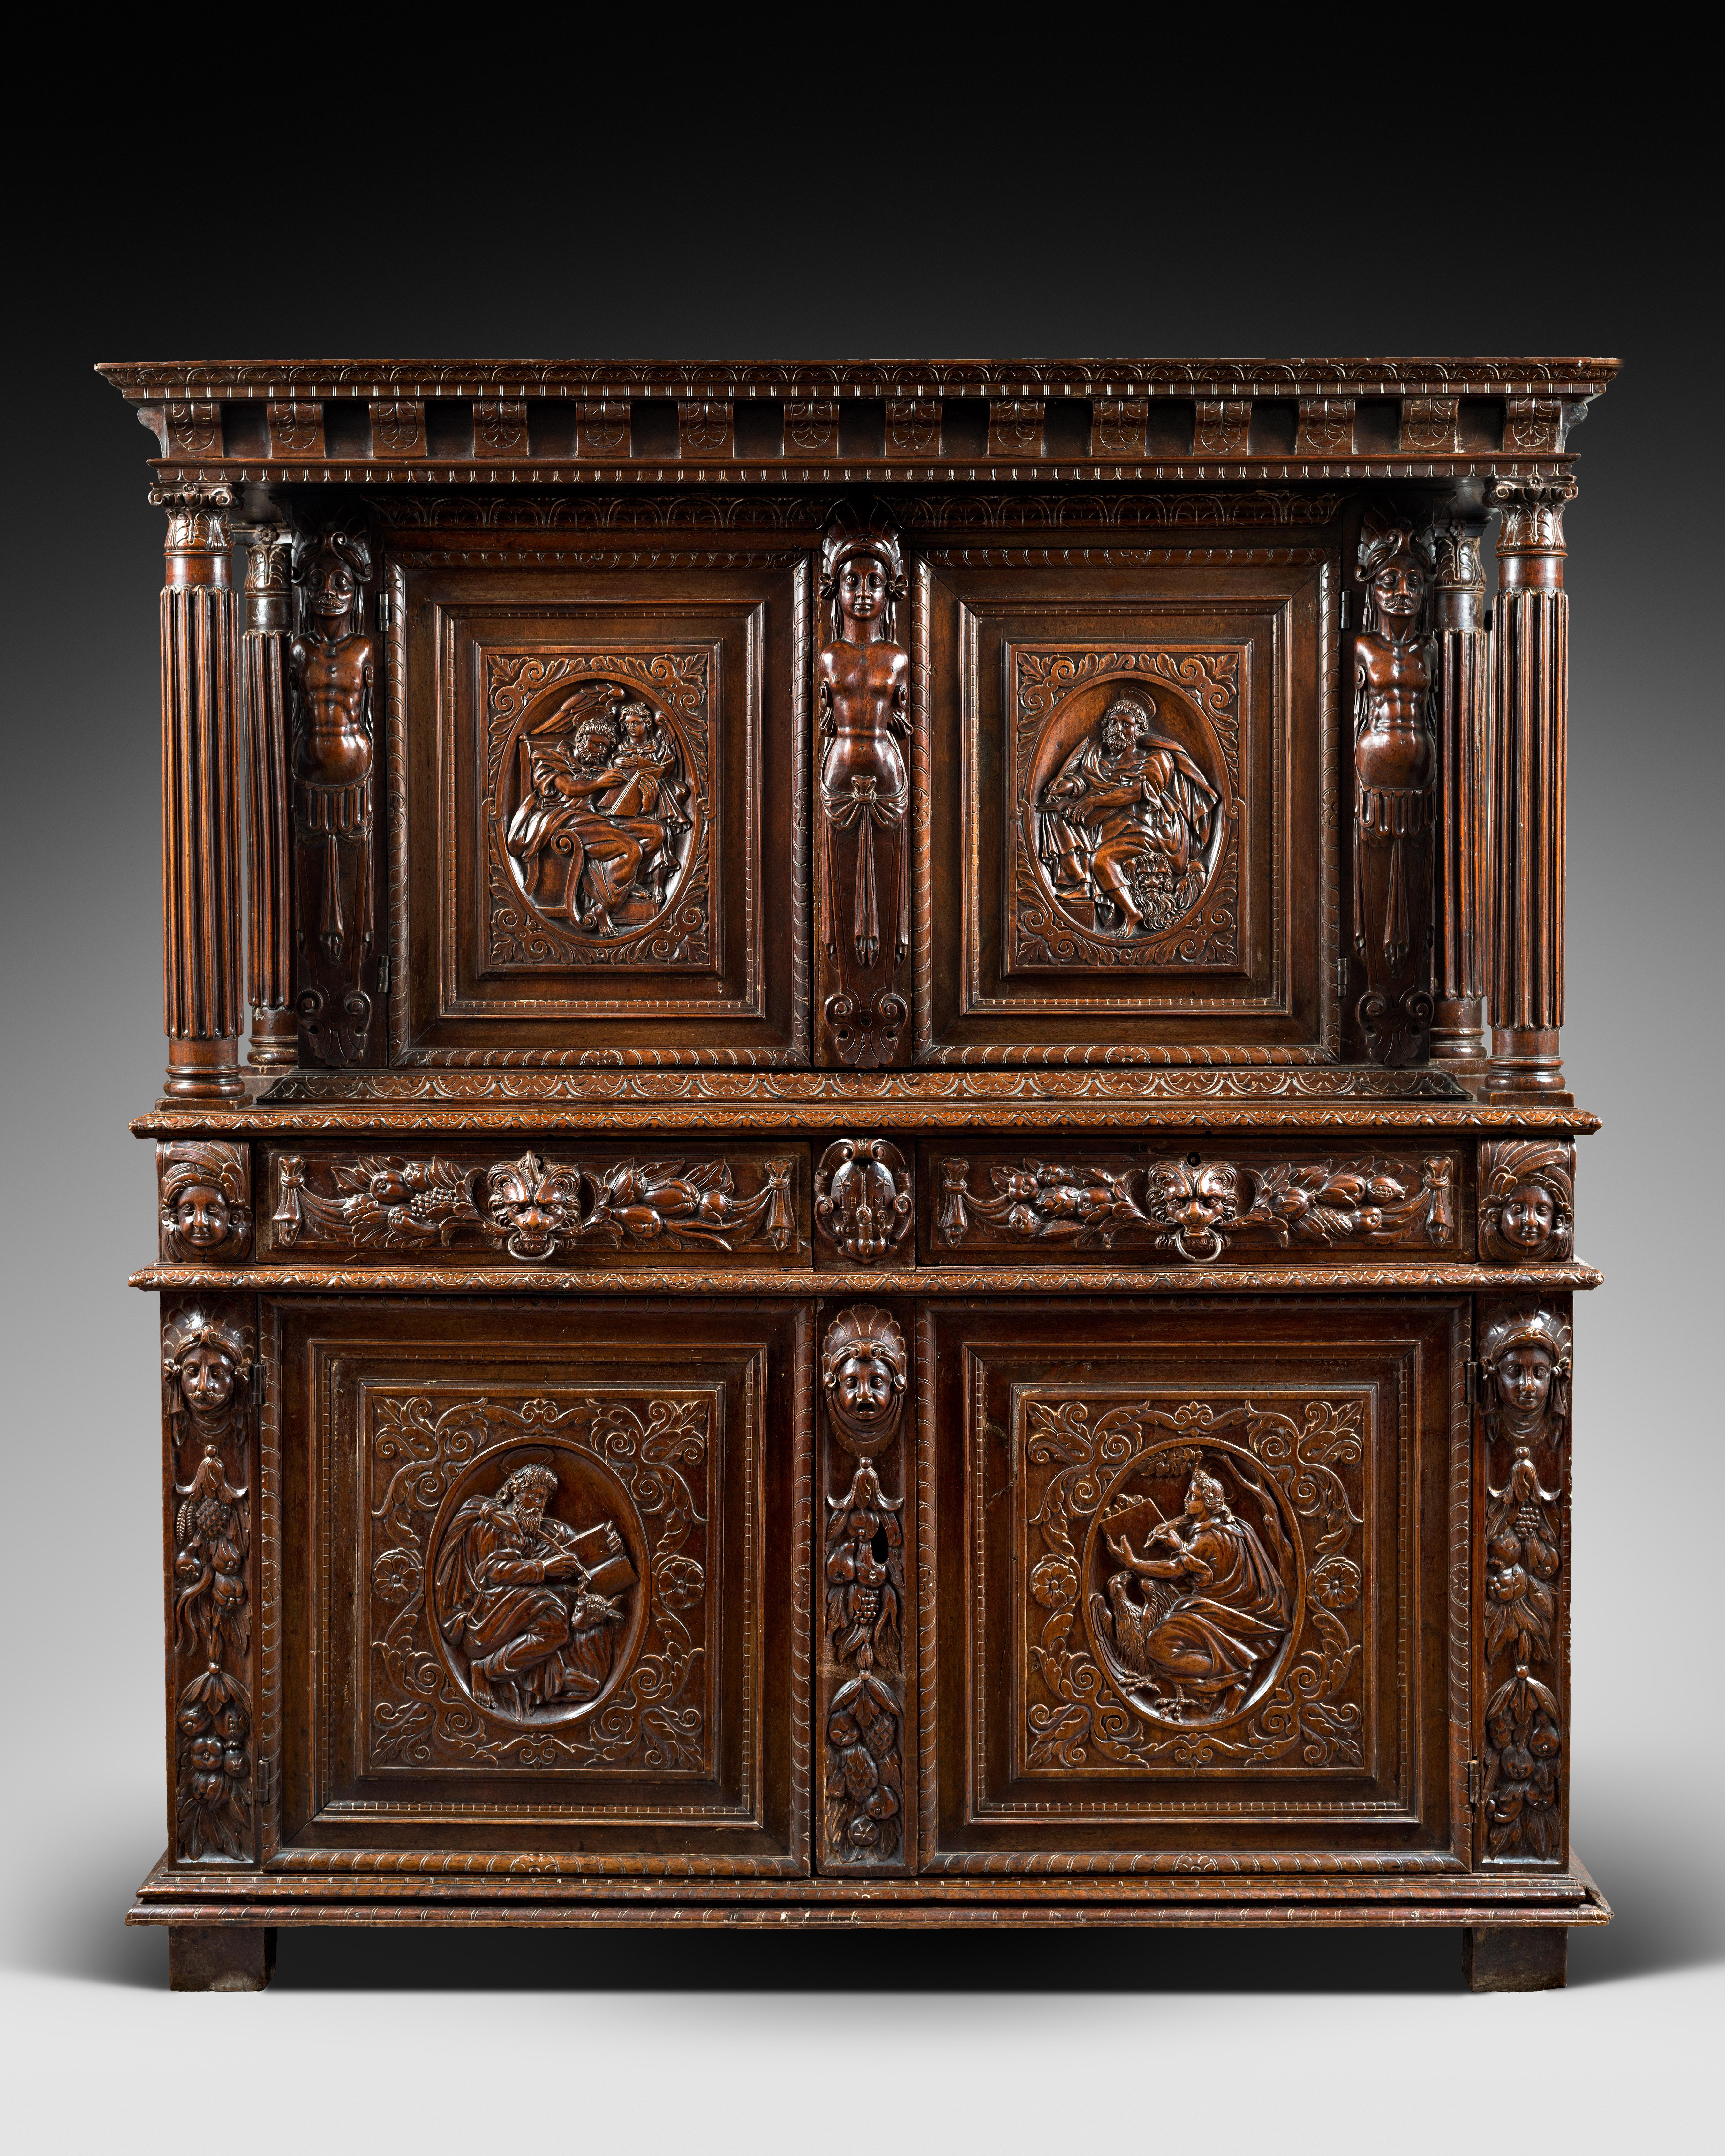 The cabinet’s upper body, slightly recessed is topped by an overlapping entablature and cornice supported both in the front and the rear by four fluted columns. 

The lower body stands on four squared feet and a moulded base. Each door-leaf’s